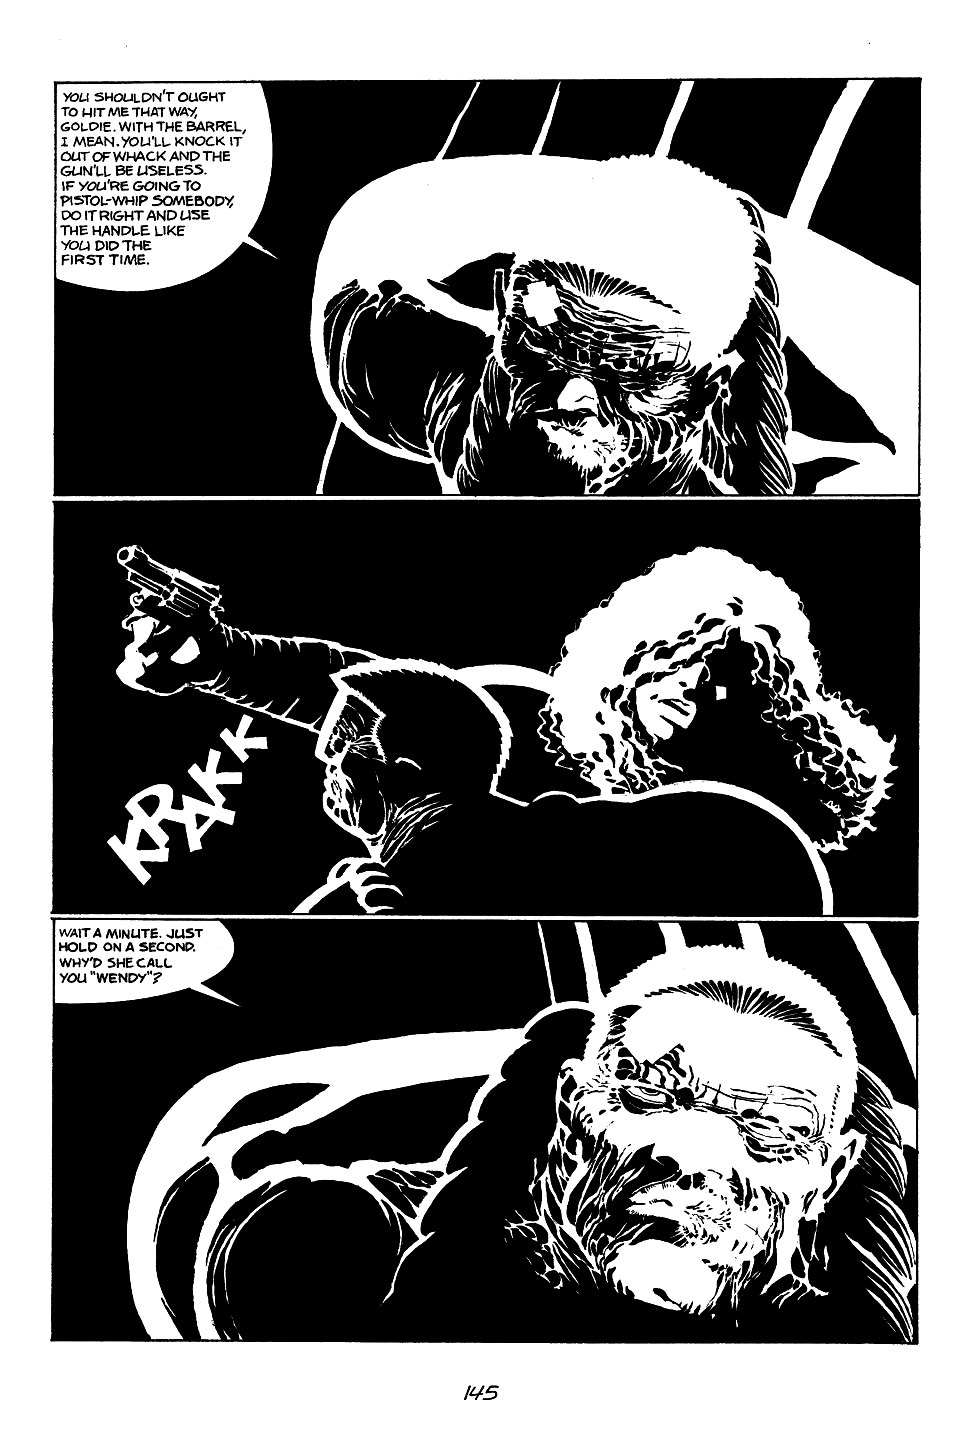 page 145 of sin city 1 the hard goodbye